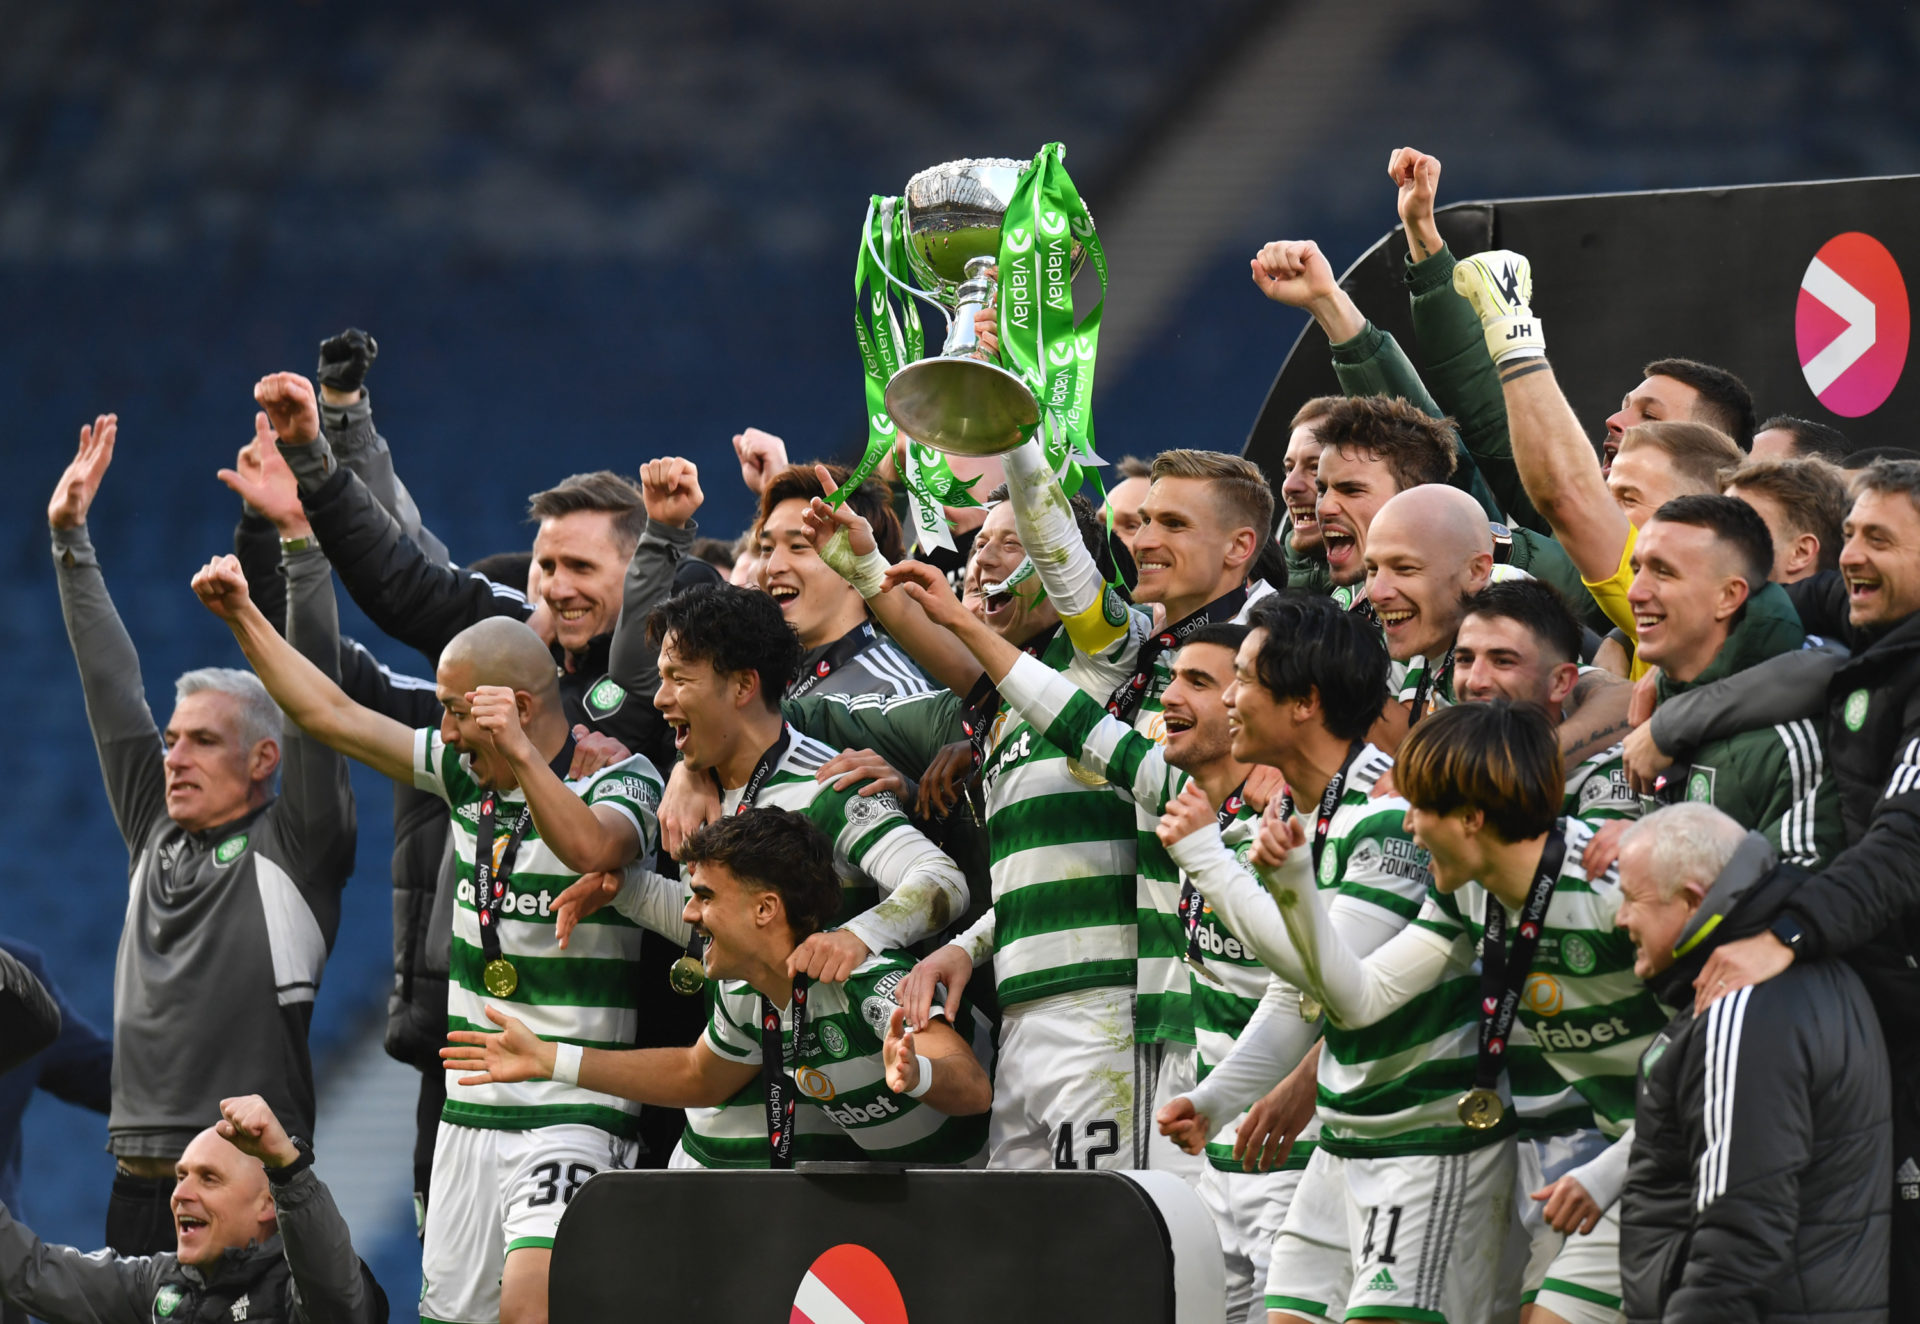 Celtic already have one trophy under their belt this season